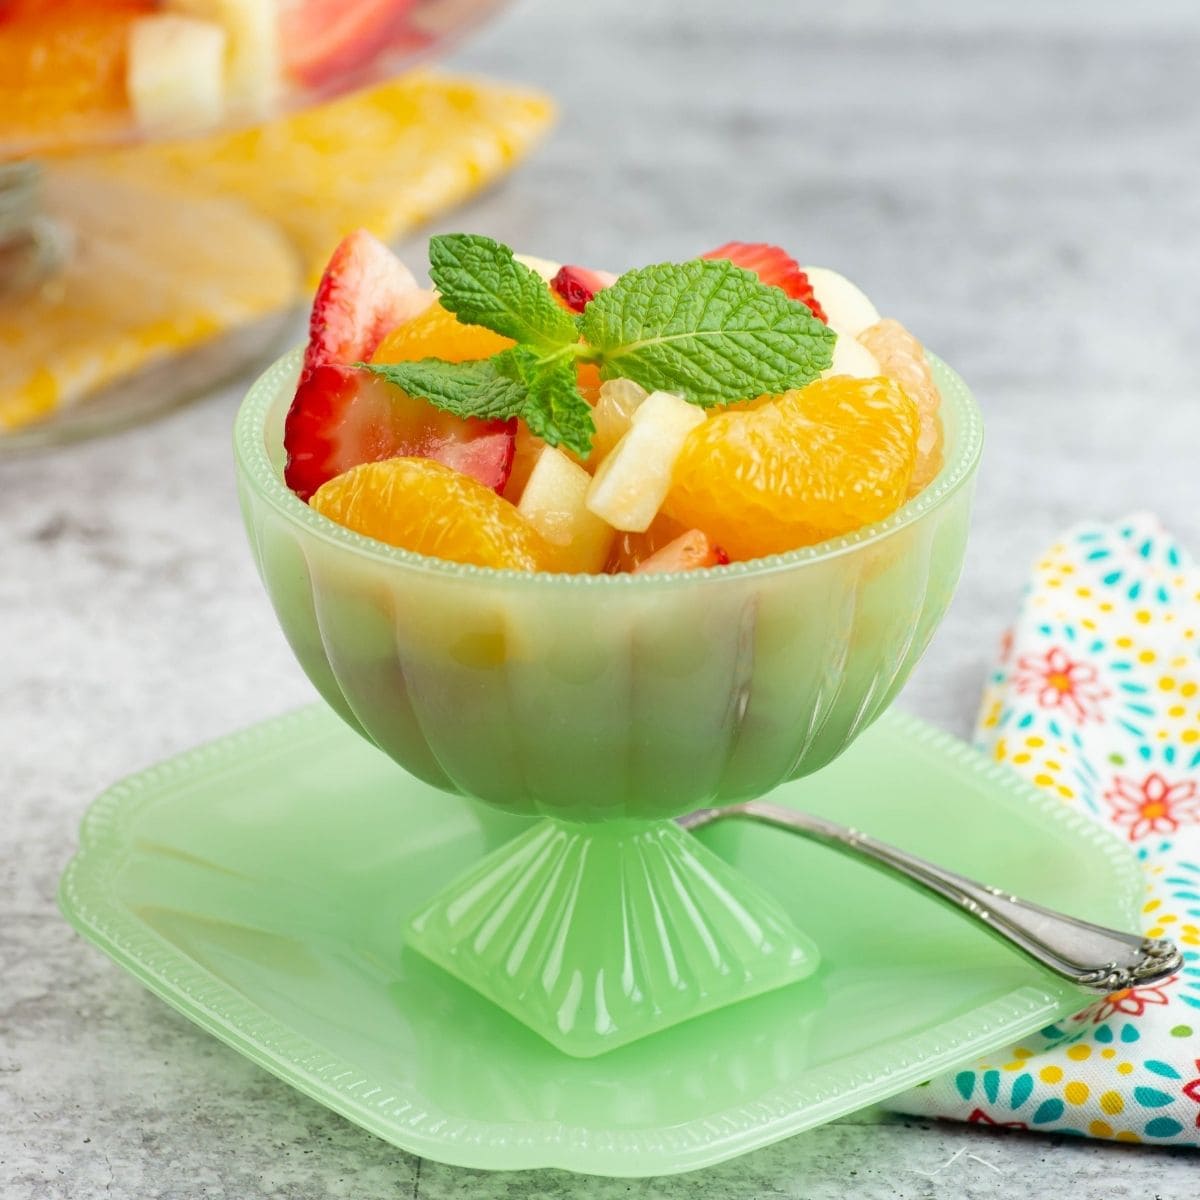 Individual serving bowl filled with citrus fruit salad garnished with a sprig of fresh mint.